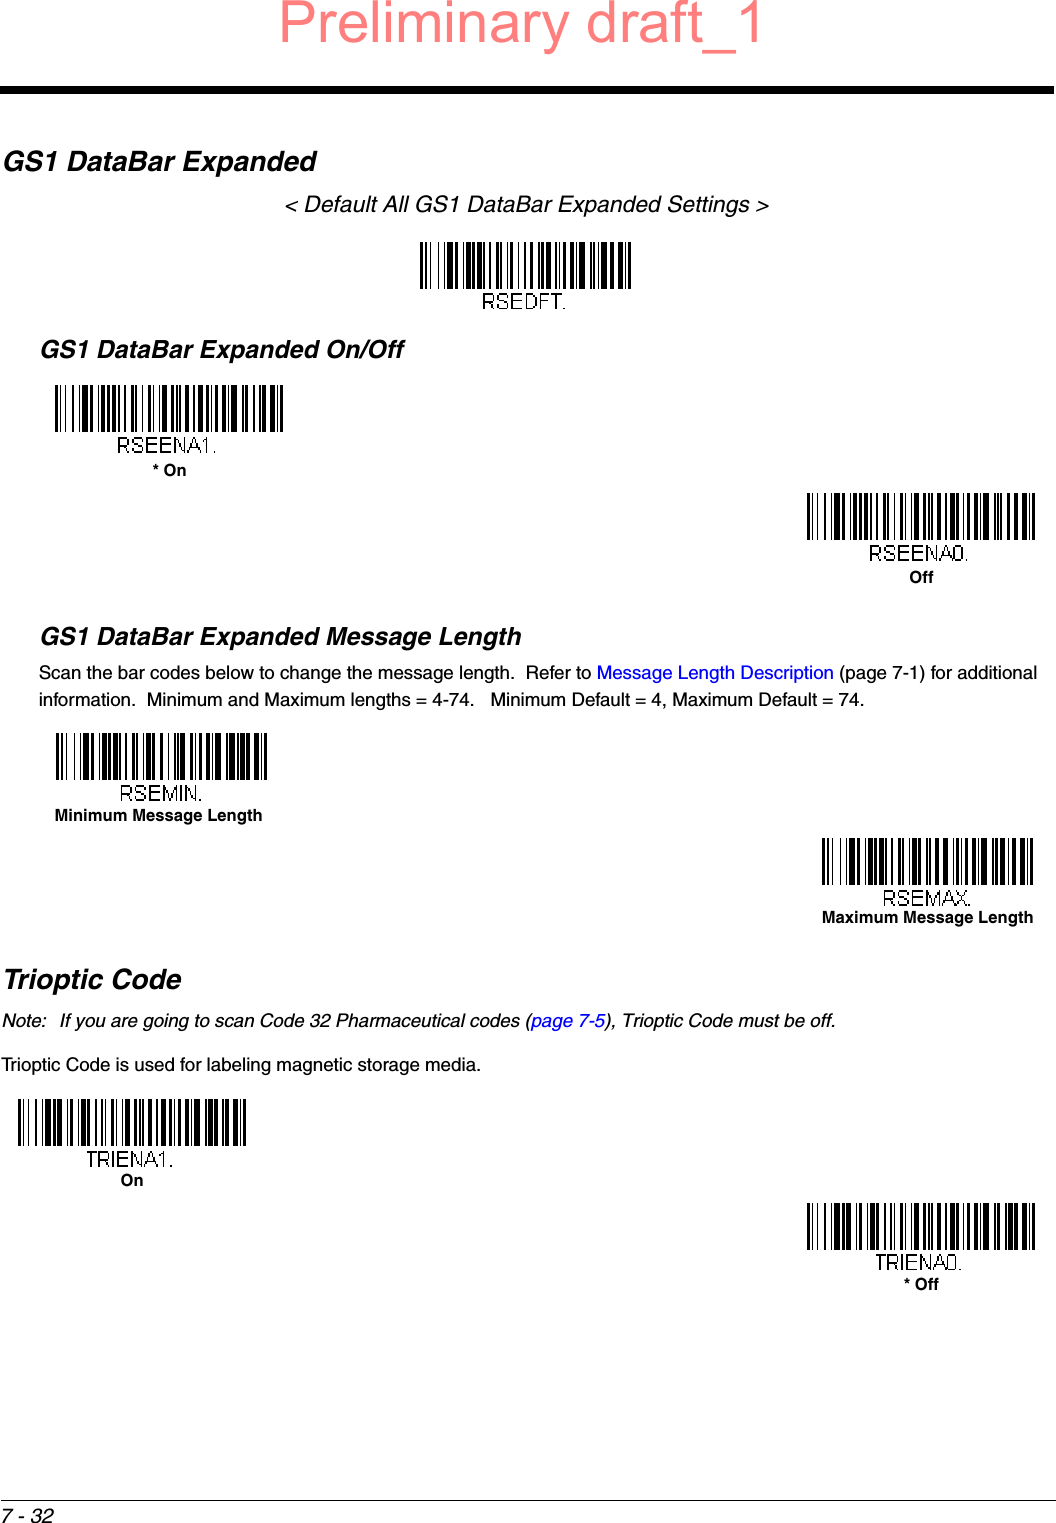 7 - 32GS1 DataBar Expanded&lt; Default All GS1 DataBar Expanded Settings &gt;GS1 DataBar Expanded On/OffGS1 DataBar Expanded Message LengthScan the bar codes below to change the message length.  Refer to Message Length Description (page 7-1) for additional information.  Minimum and Maximum lengths = 4-74.   Minimum Default = 4, Maximum Default = 74.Trioptic CodeNote: If you are going to scan Code 32 Pharmaceutical codes (page 7-5), Trioptic Code must be off.Trioptic Code is used for labeling magnetic storage media.* OnOffMinimum Message LengthMaximum Message LengthOn* OffPreliminary draft_1